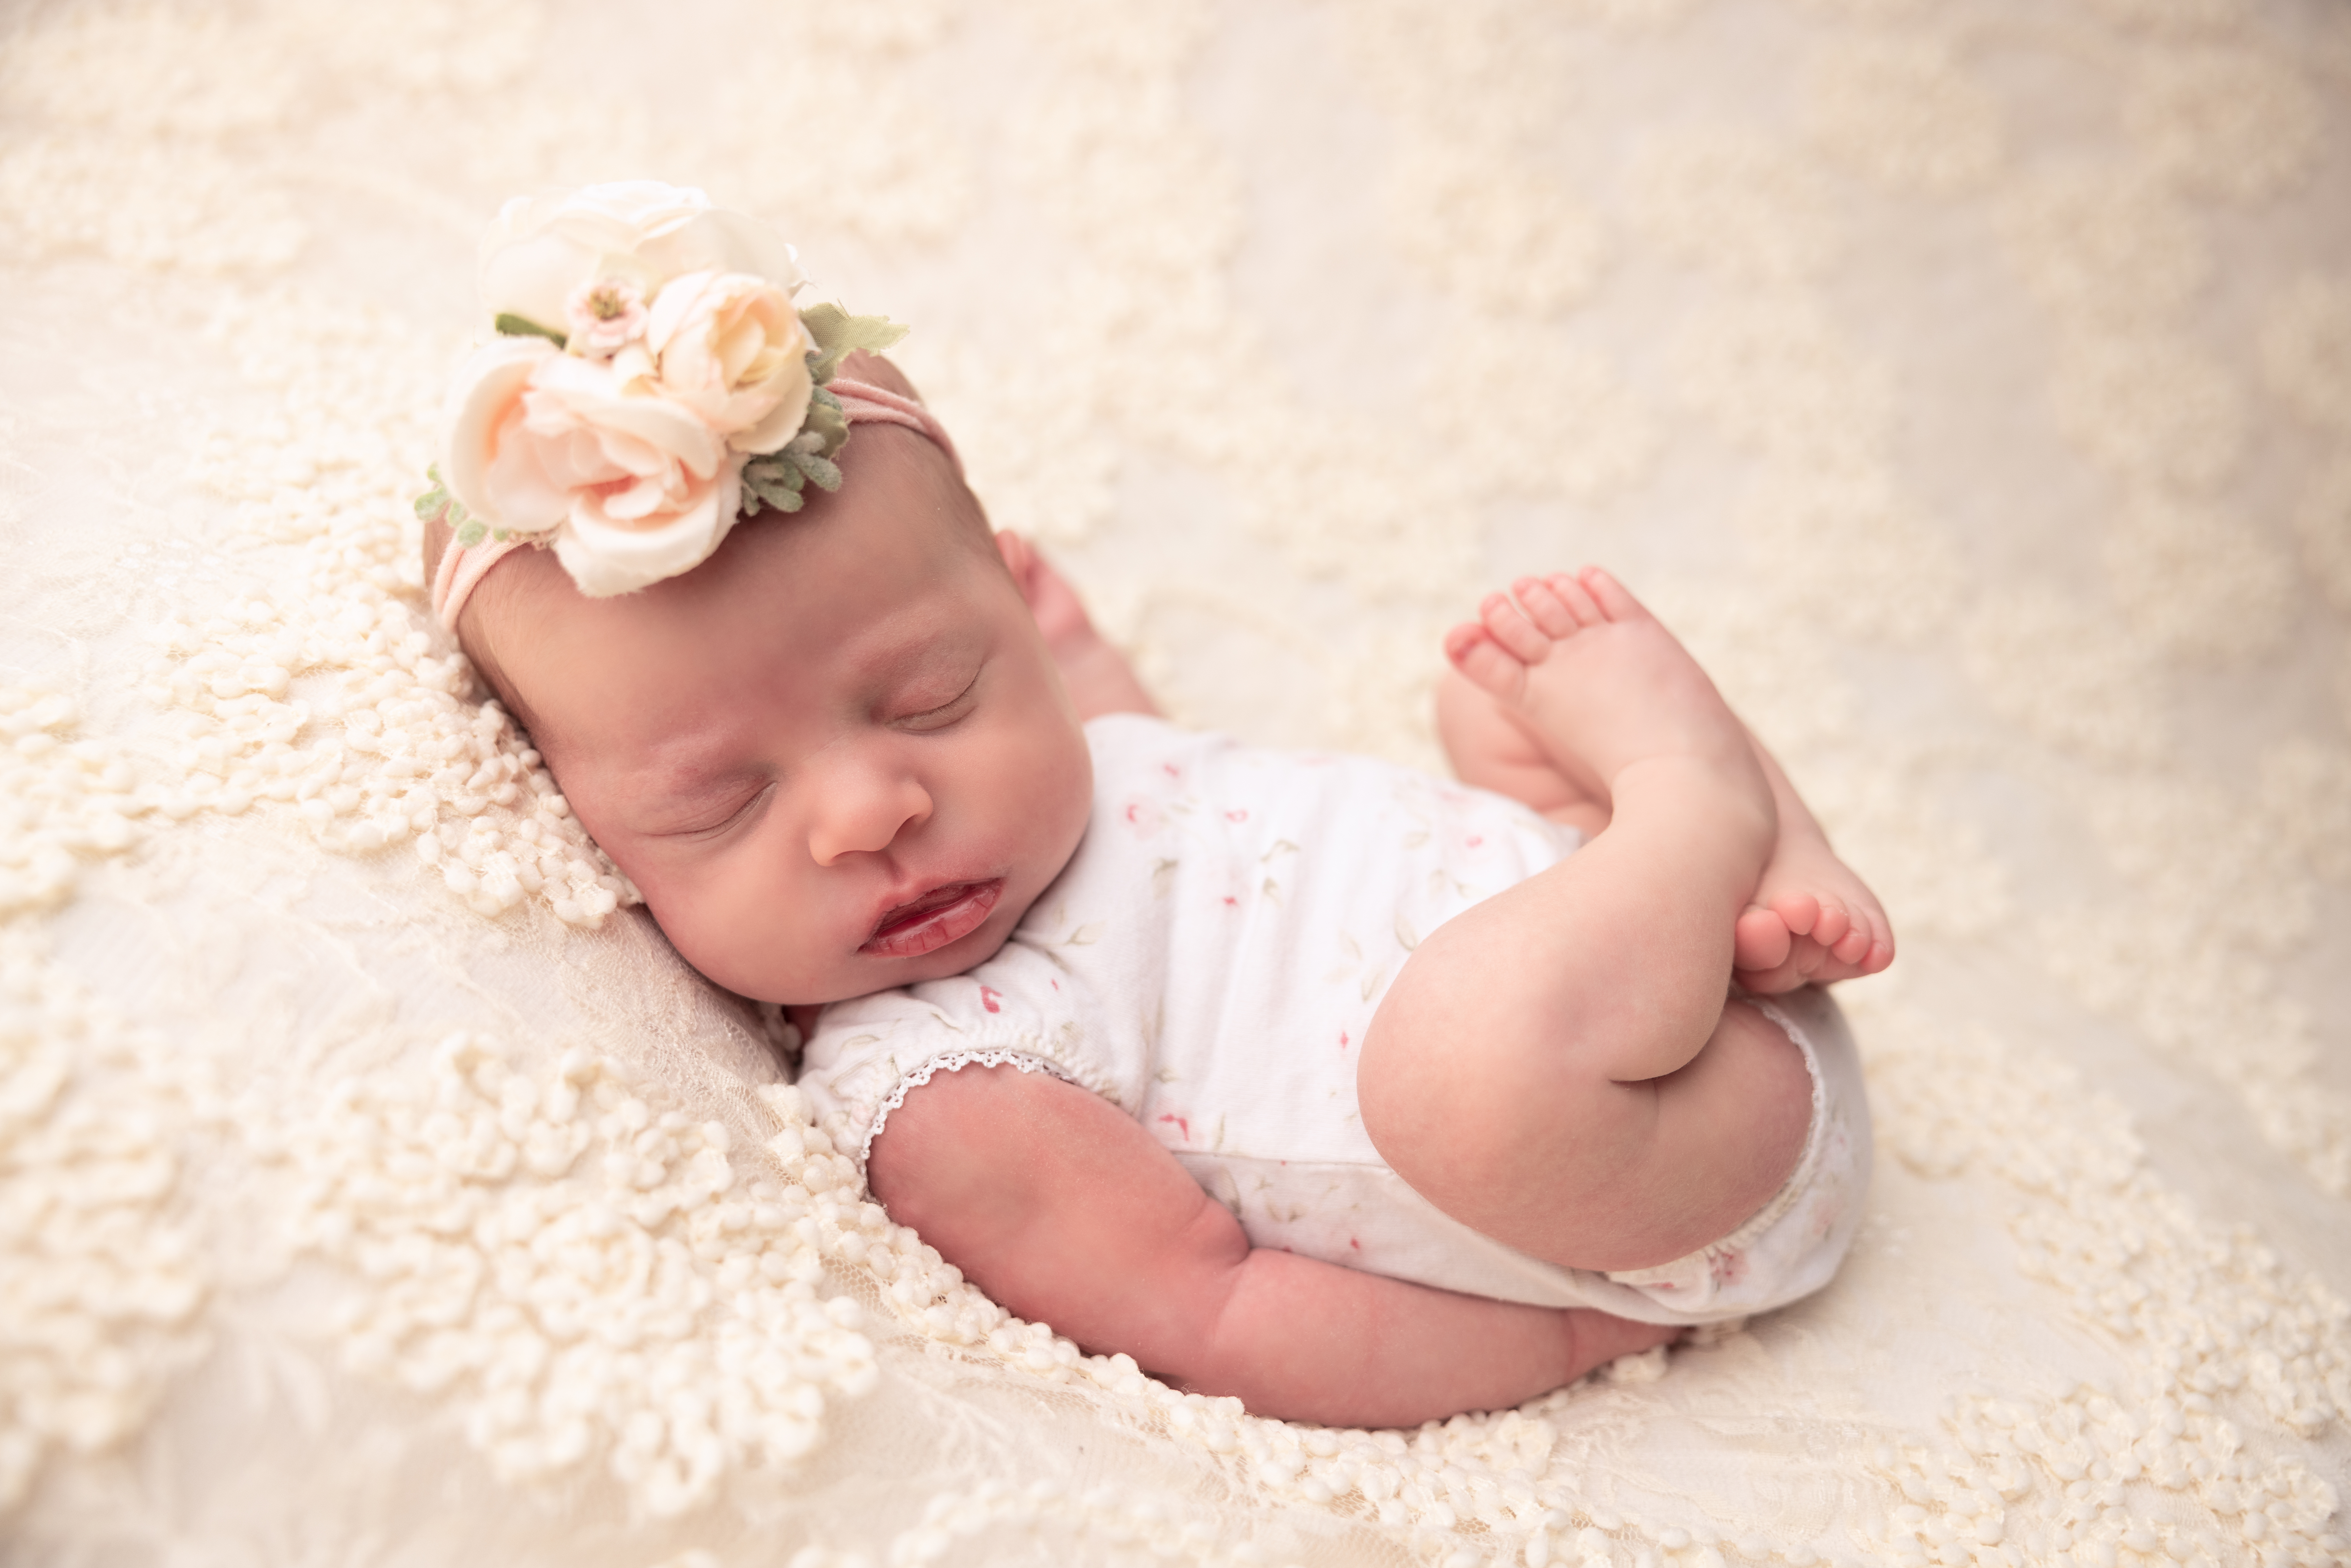 Newborn Baby in a Huck Finn Pose wearing a white romper and floral headband on a floral lace blanket